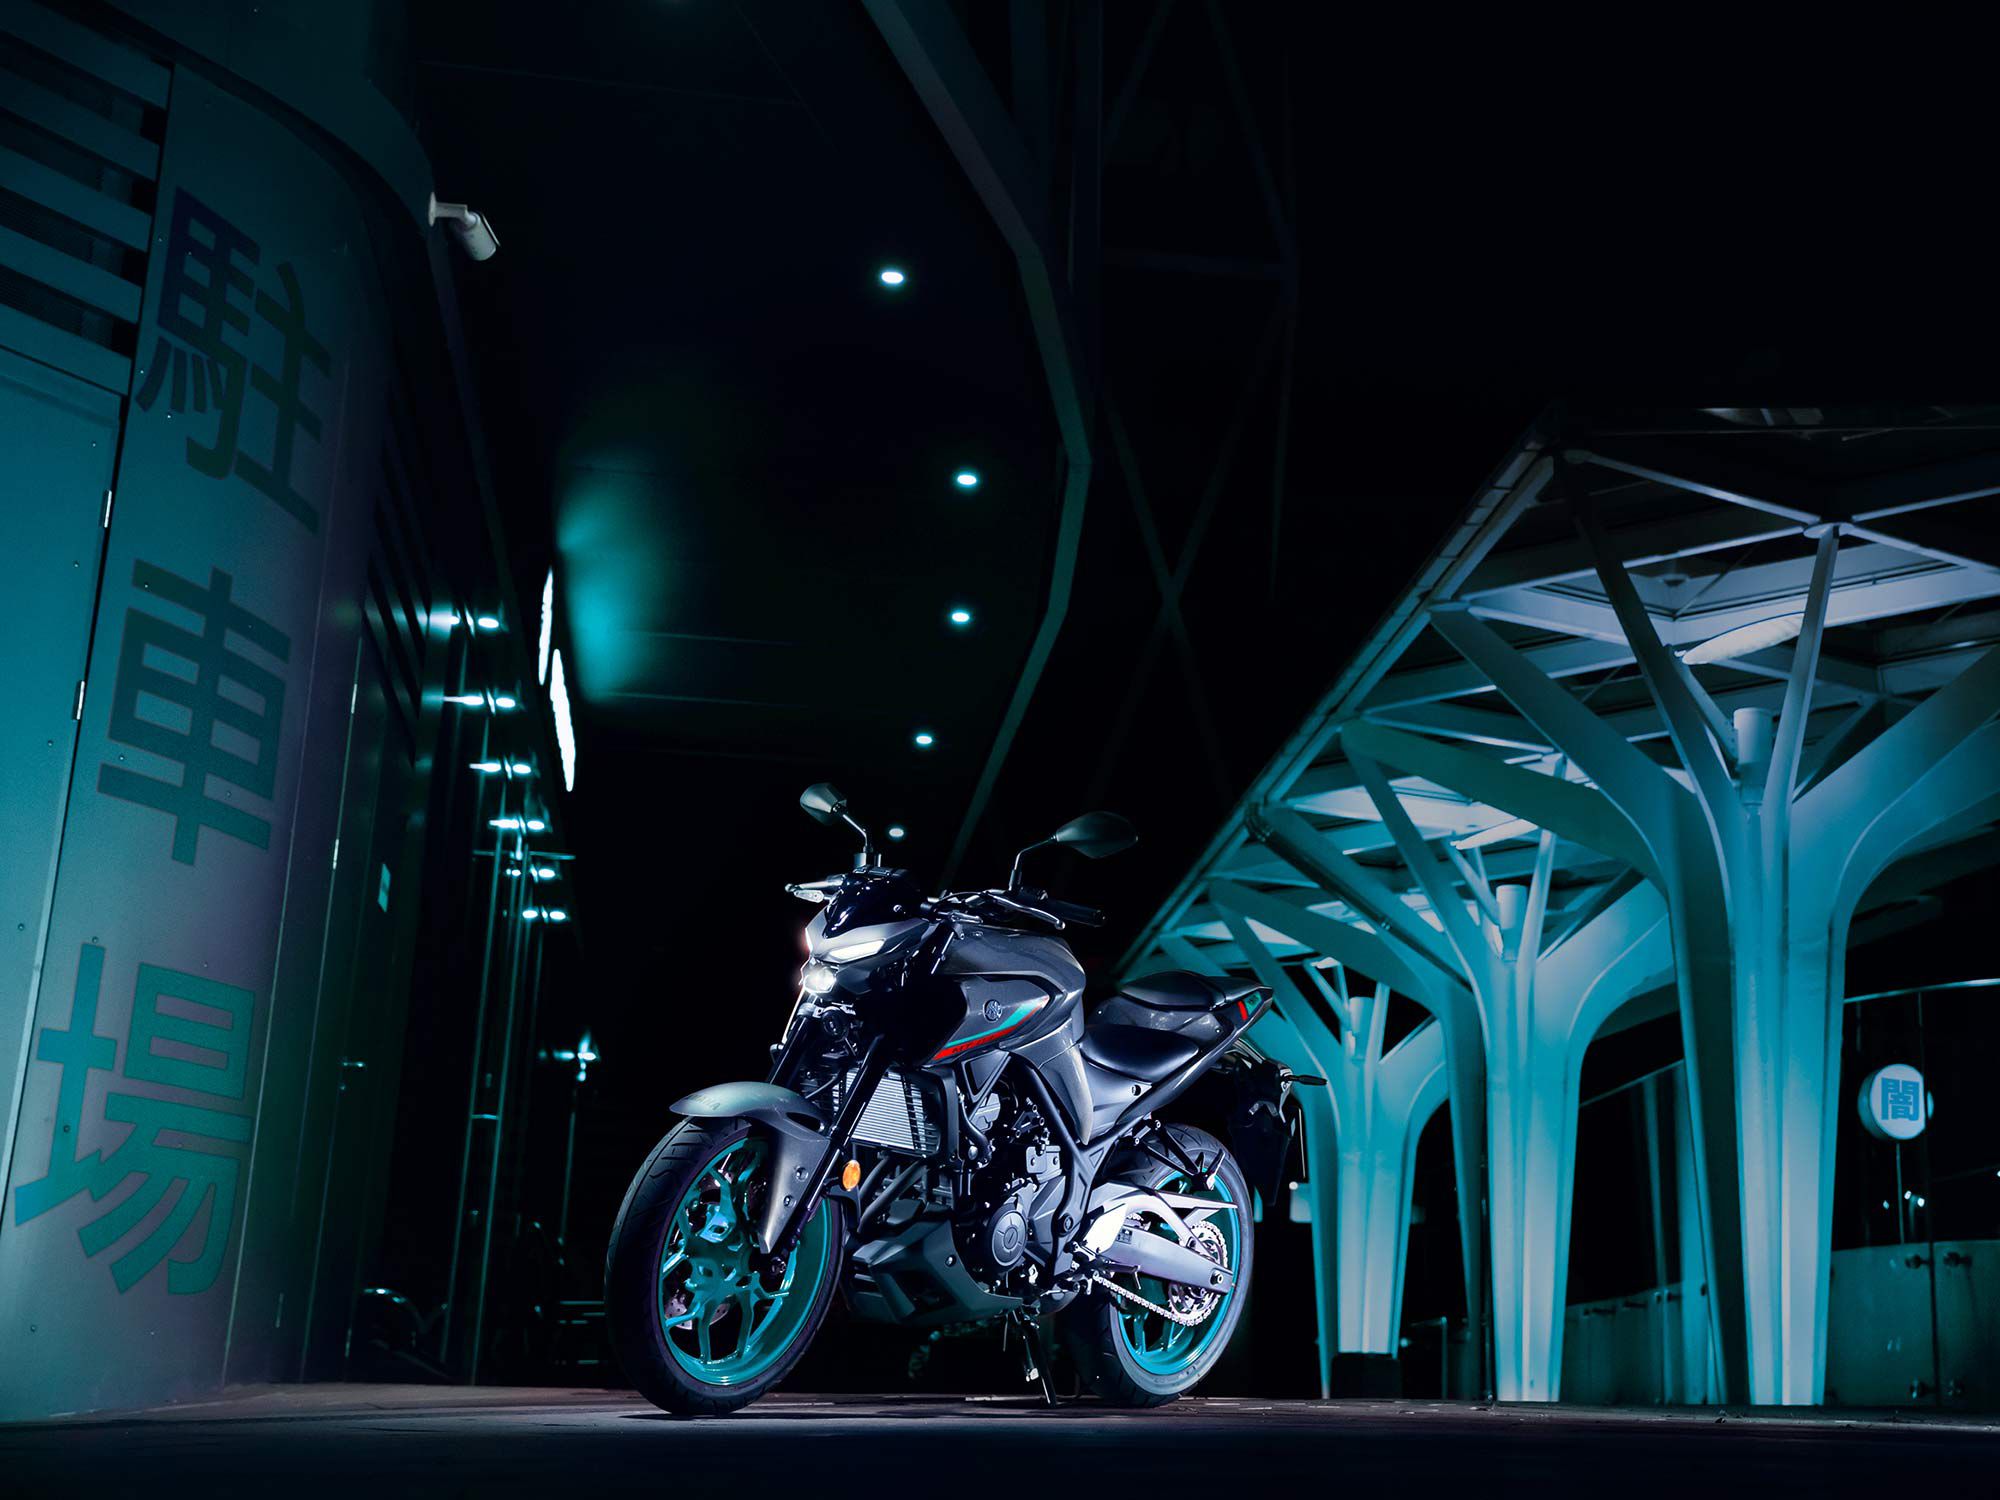 Yamaha’s MT-03 is a leader among low-displacement, naked motorcycles.